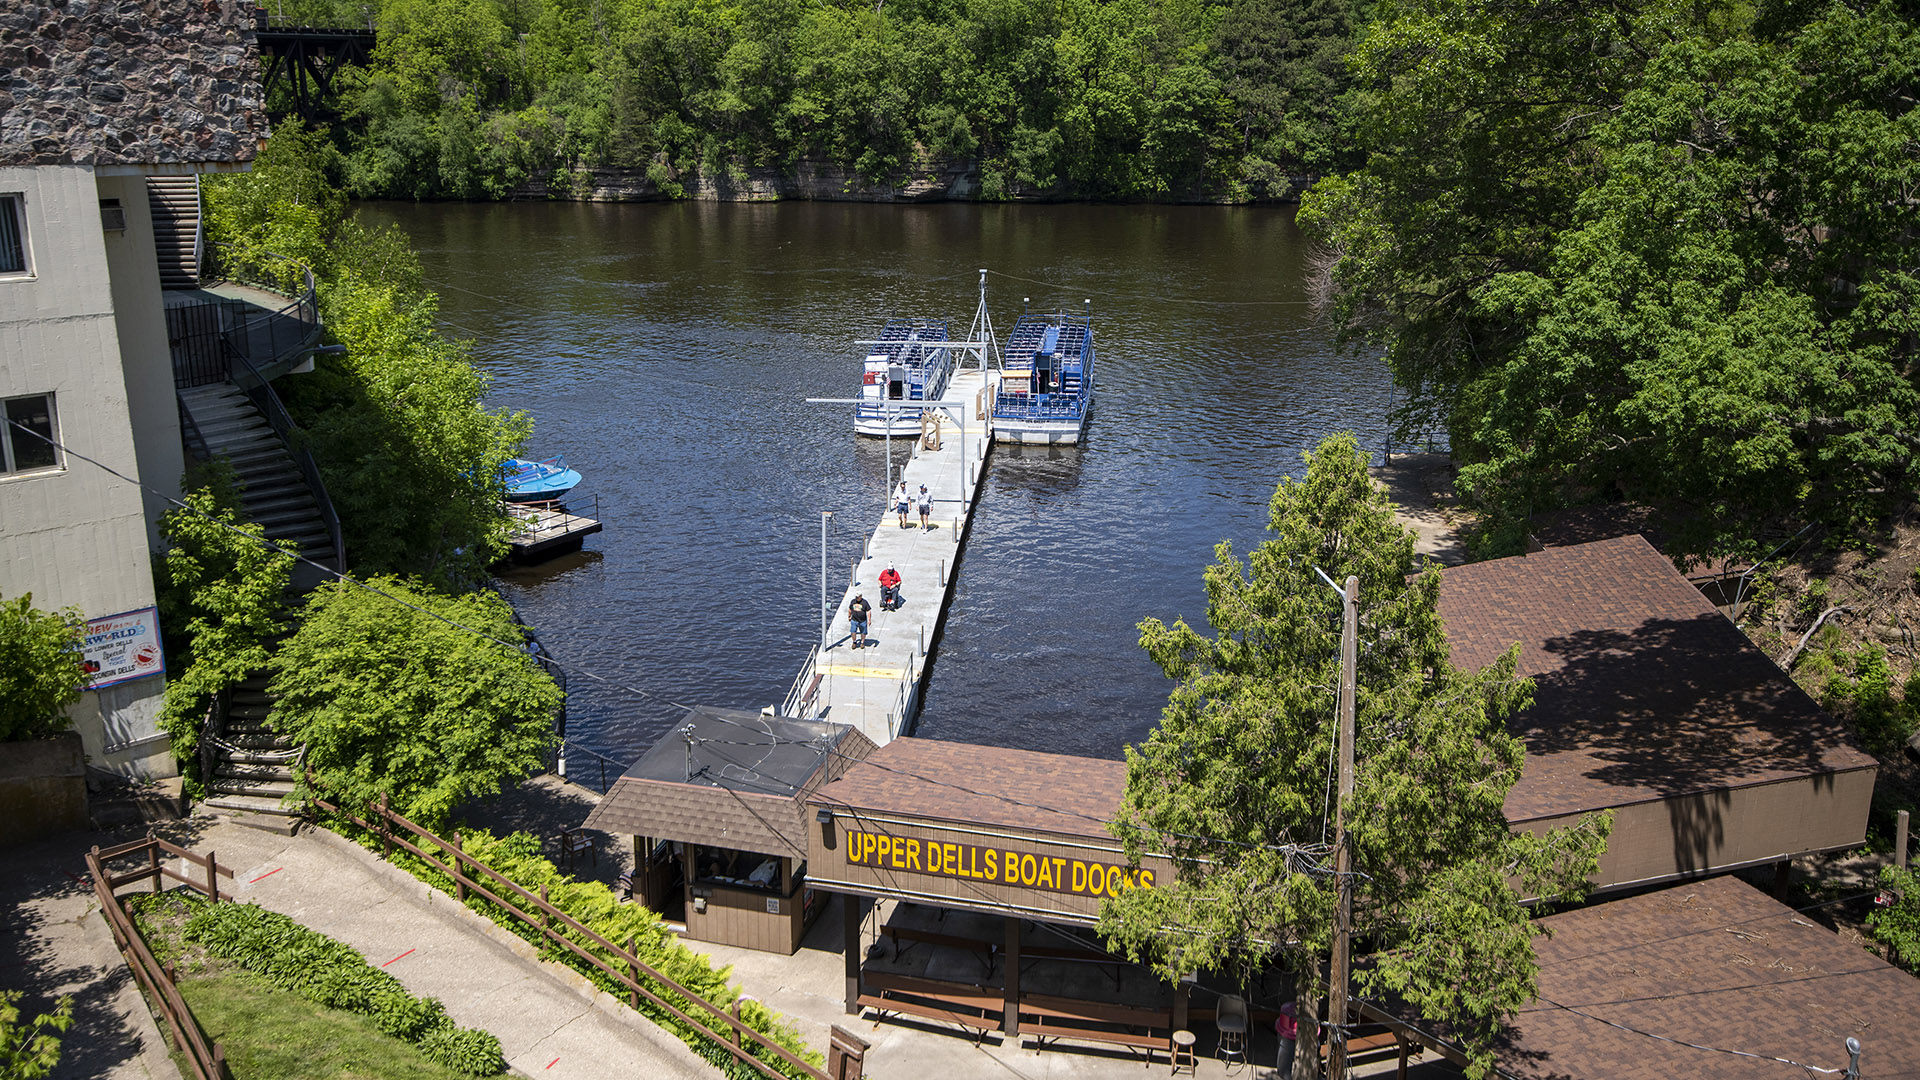 Excursion boats are docked on a pier extending from a building with the sign "Upper Dells Boat Docks," with other buildings on the near side of the river and trees covering the opposite shores.